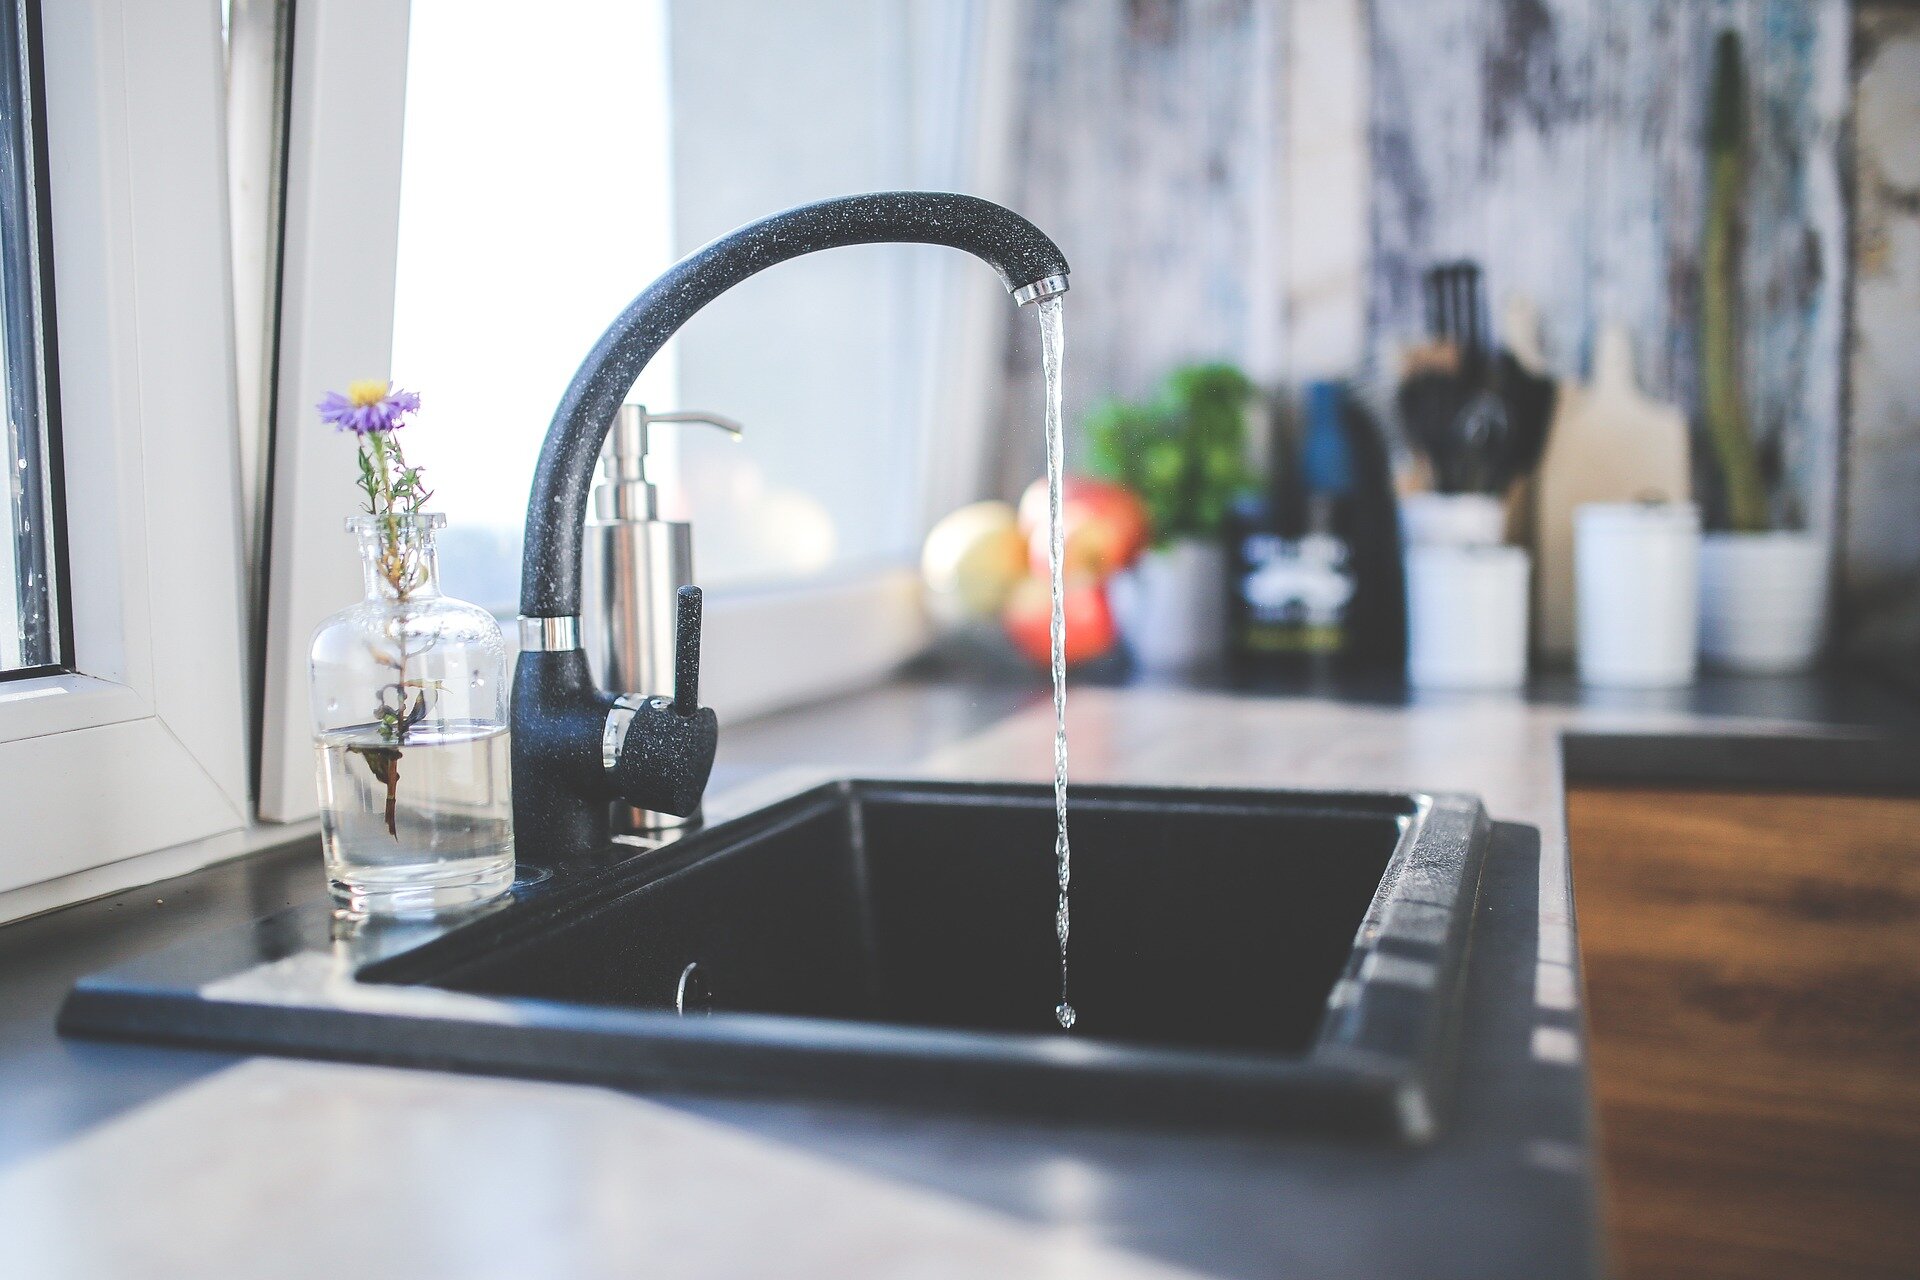 5 Tips to Unclog a Sink  Petri Plumbing & Heating